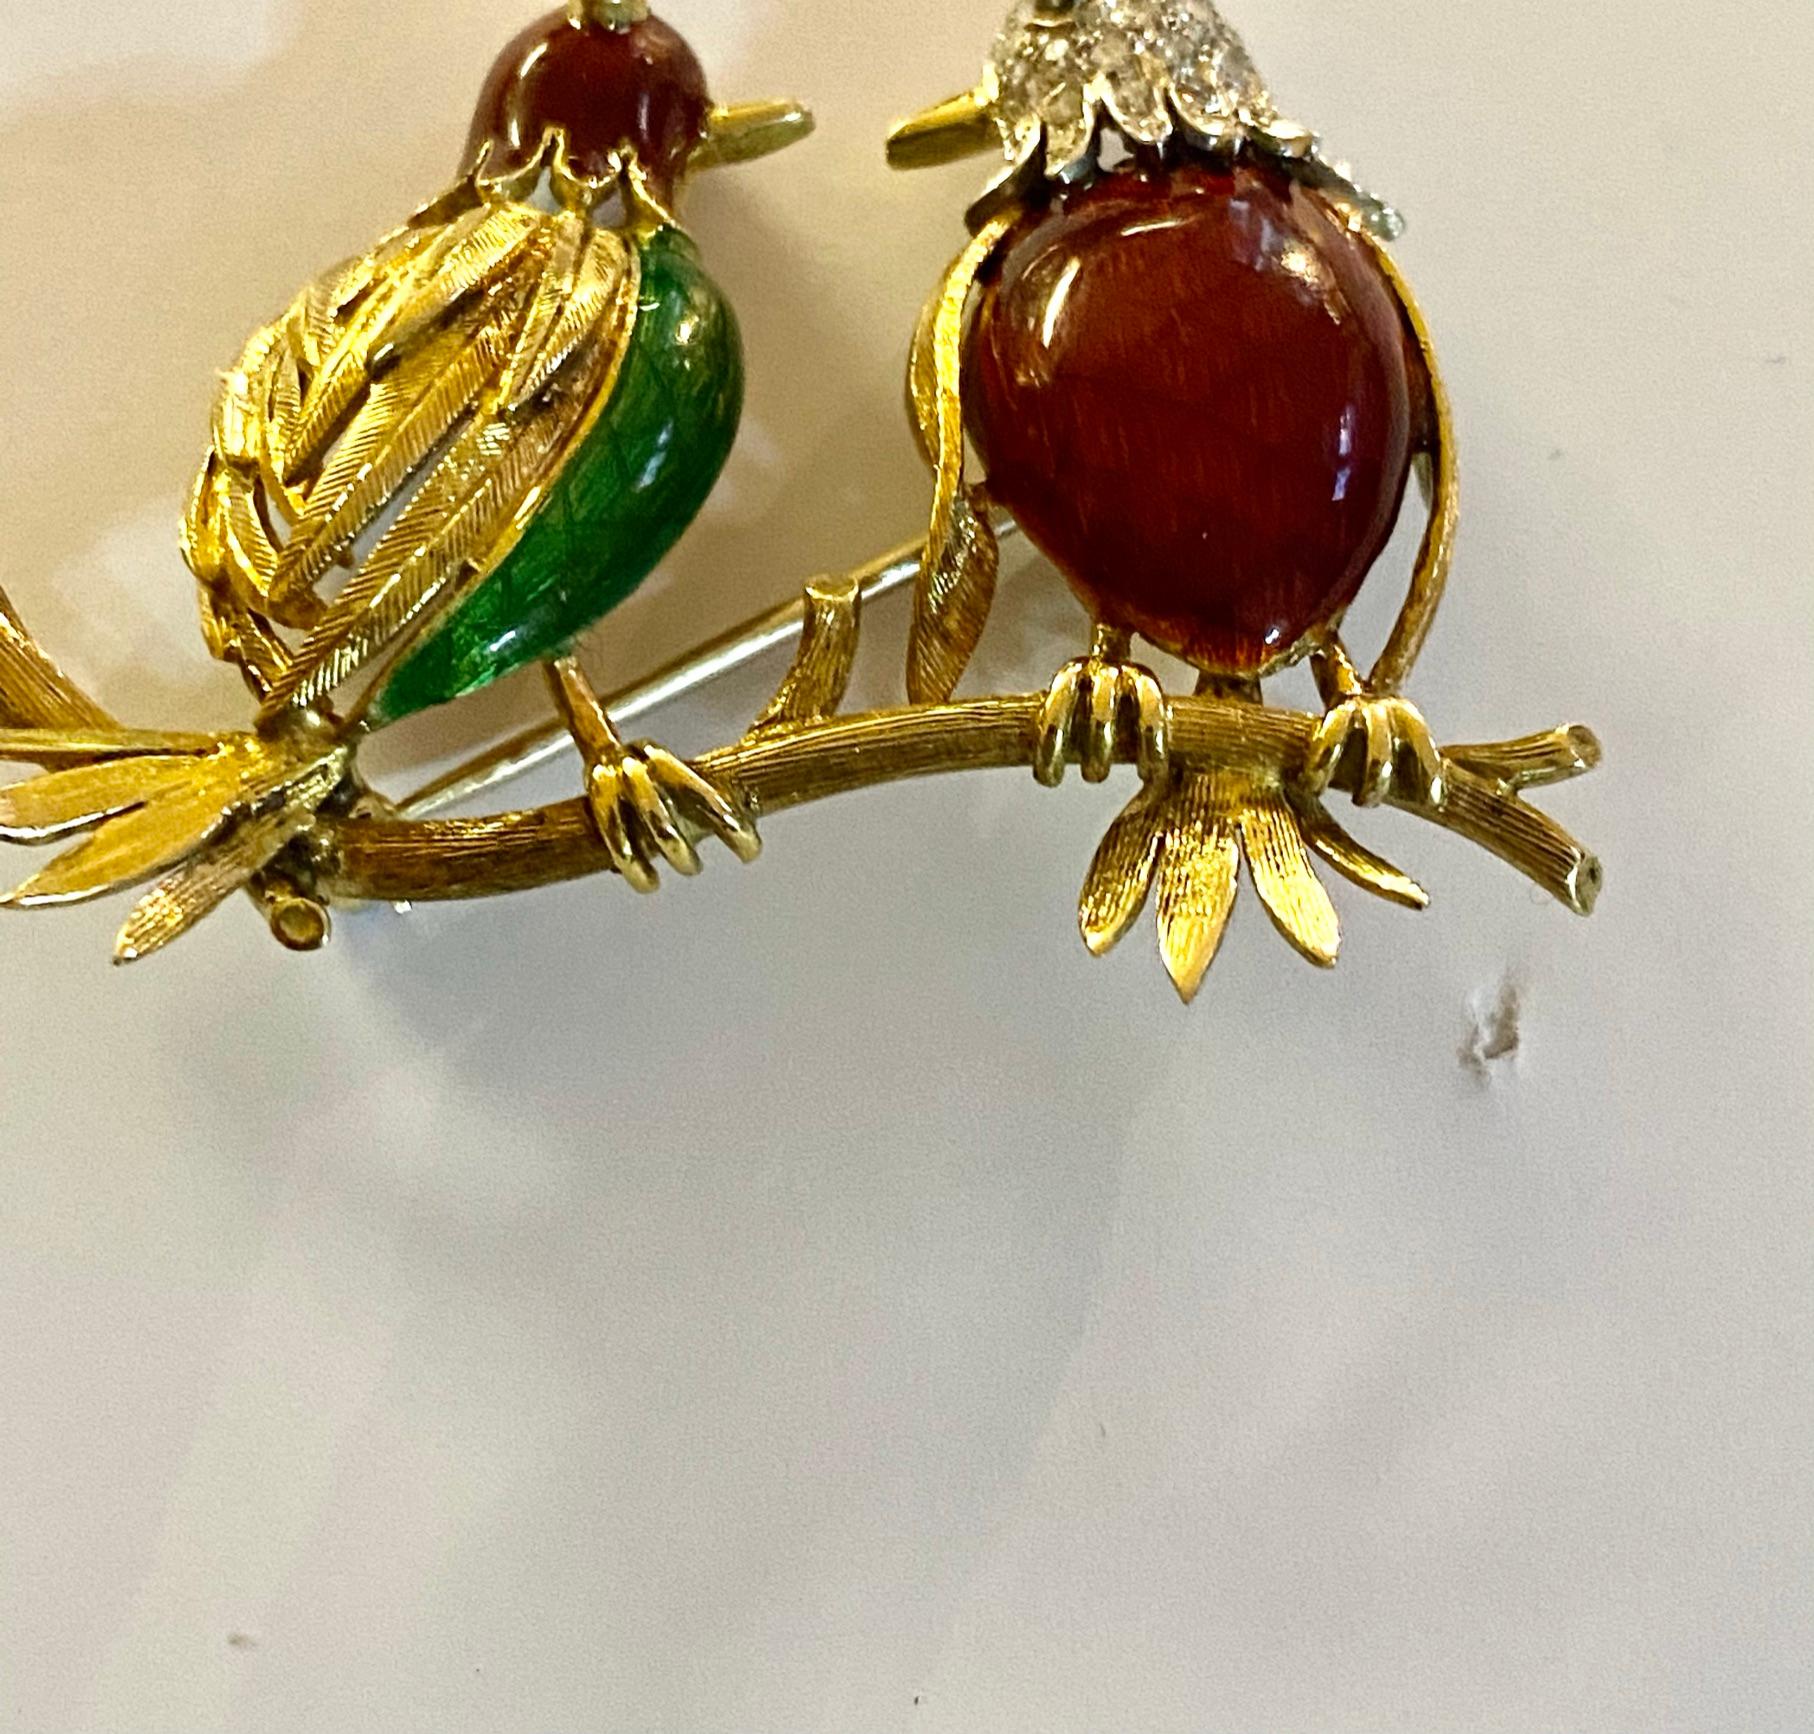 One (1) 18K. Yellow Gold Brooch , stamped KT18 decorated with Red and Green Enamel.
37 single Cut Diamonds = 0.45 ct.  VVS /SI  F-G
1 syntehtic Ruby 0.03 ct.
Made in USA ca 1960  and imported to England (UK) in that time. ()original stamped)
Weight: